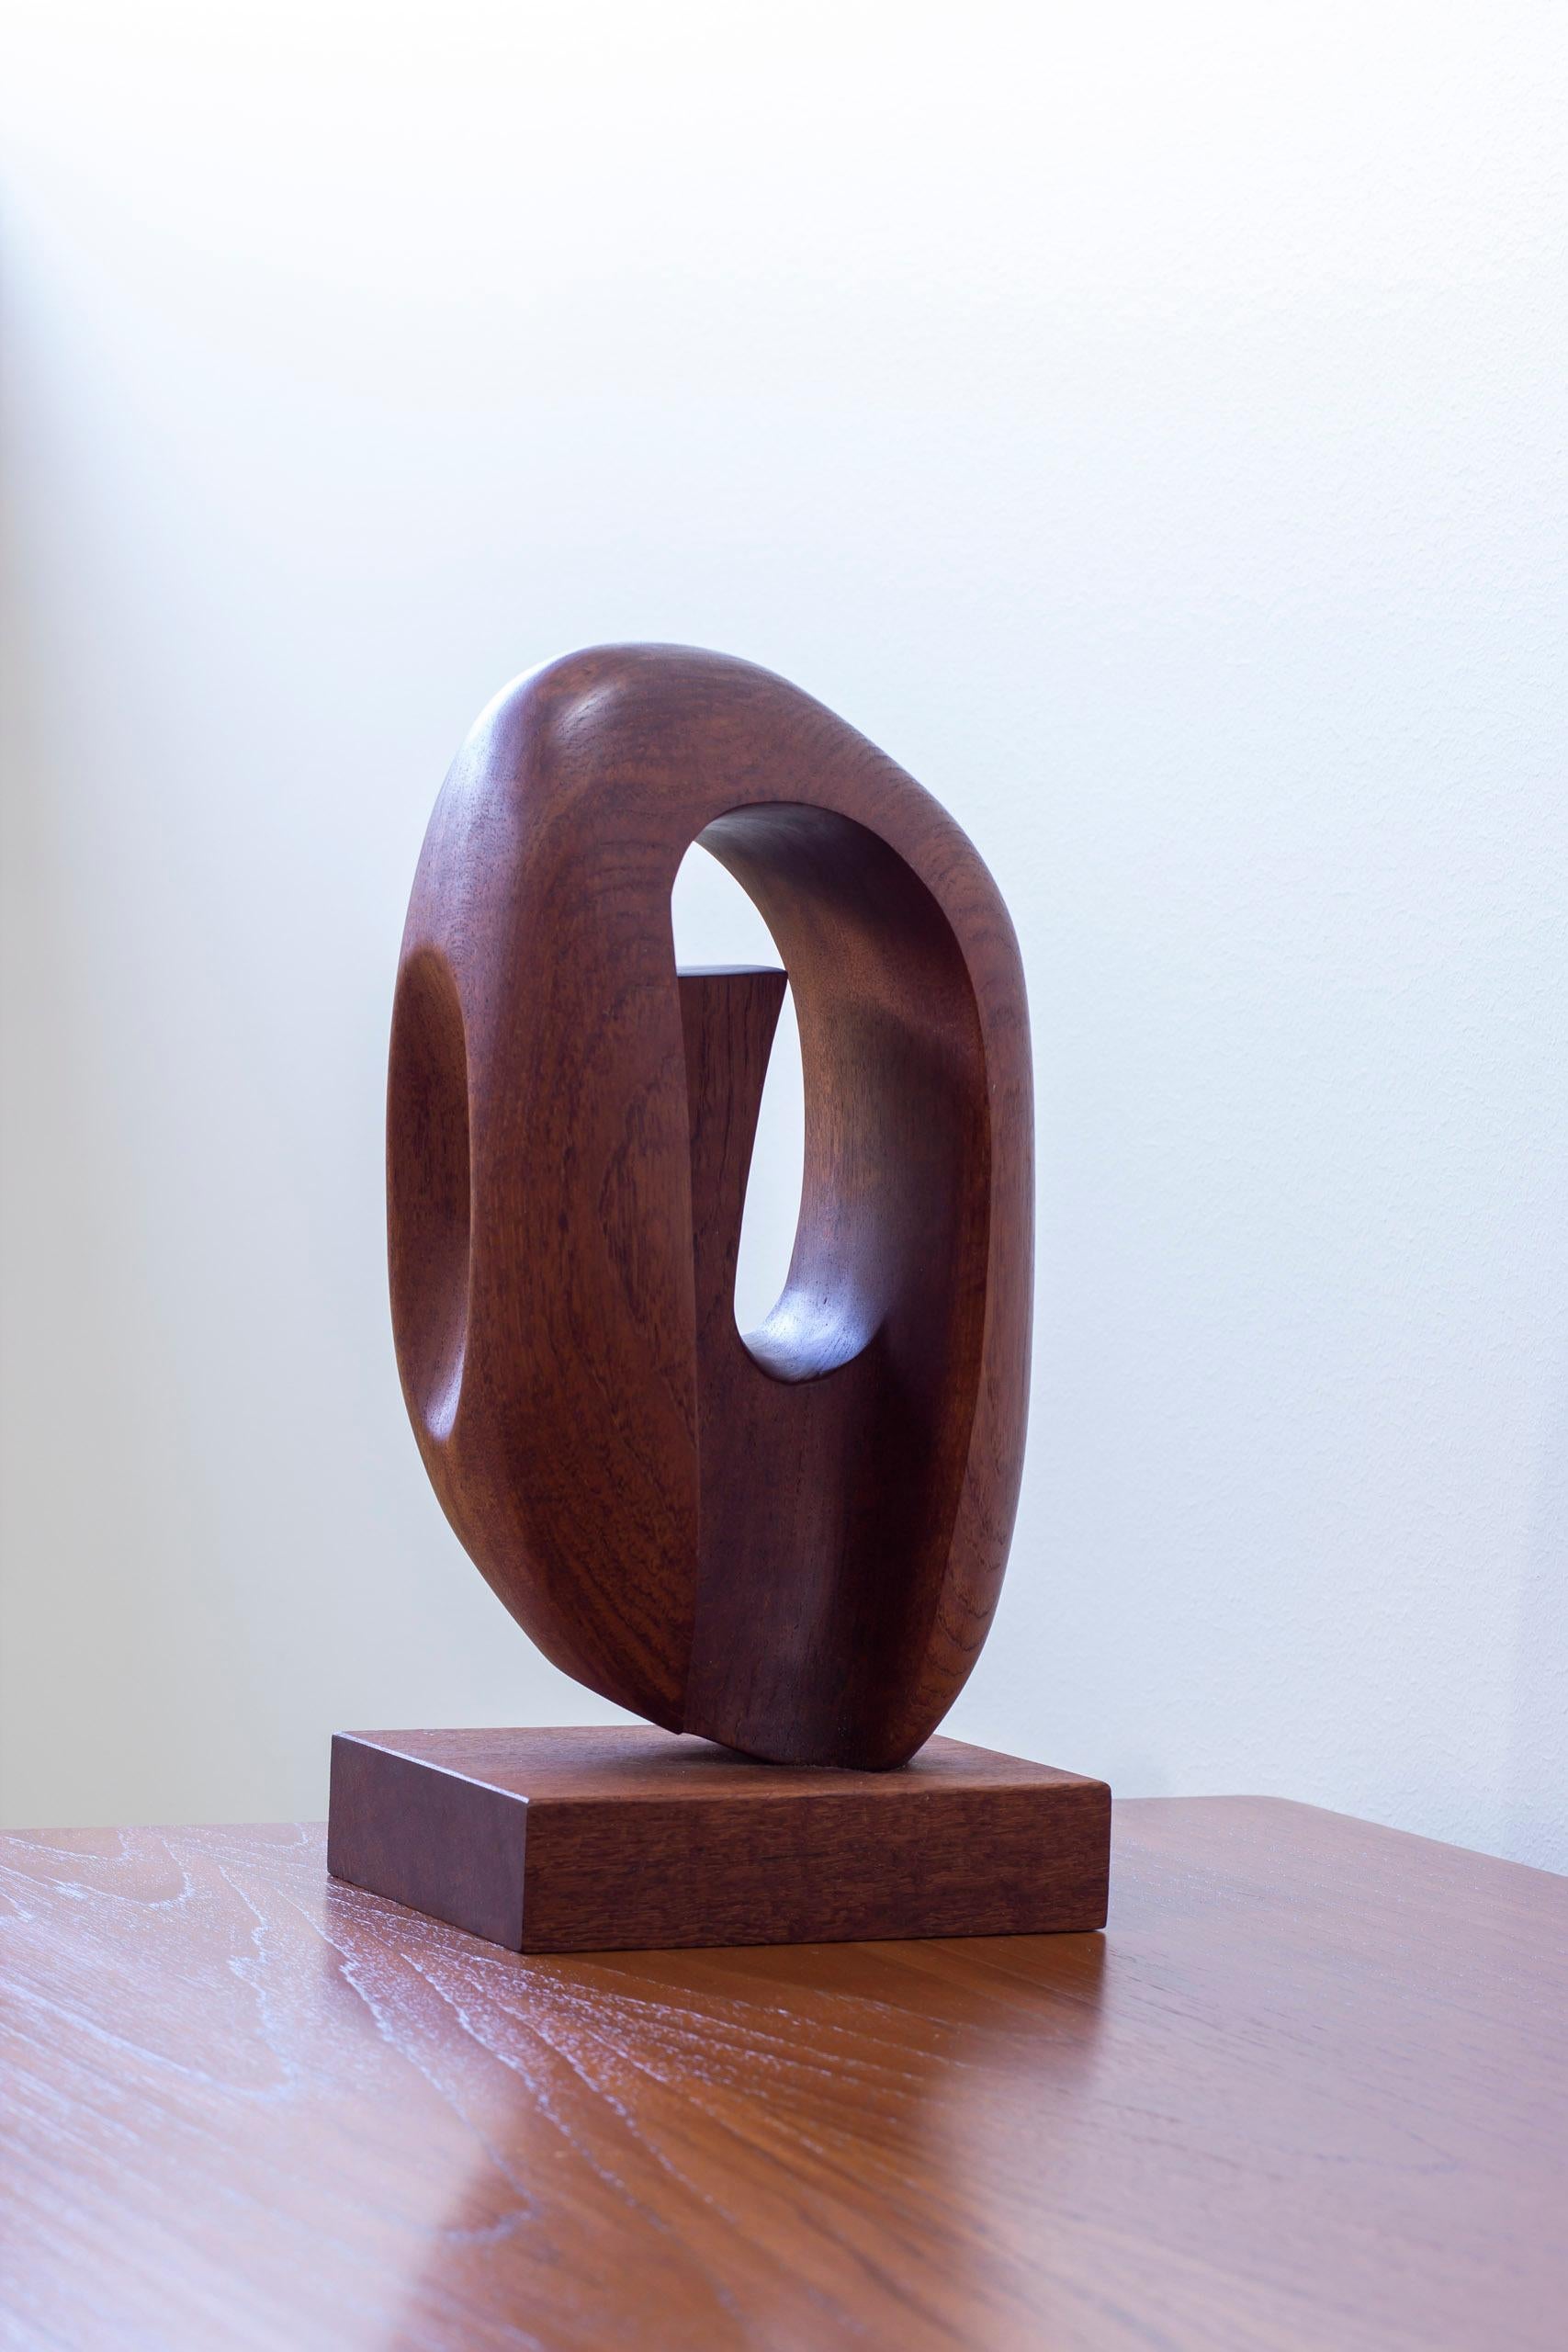 Organic wooden sculpture in the style of Henry Moore by Swedish wood carver. Made by unknown Swedish artist during the 1950s.  Very good vintage condition with light age related wear and patina.



Artist: Unknown

Year: 1950s

Condition: Very